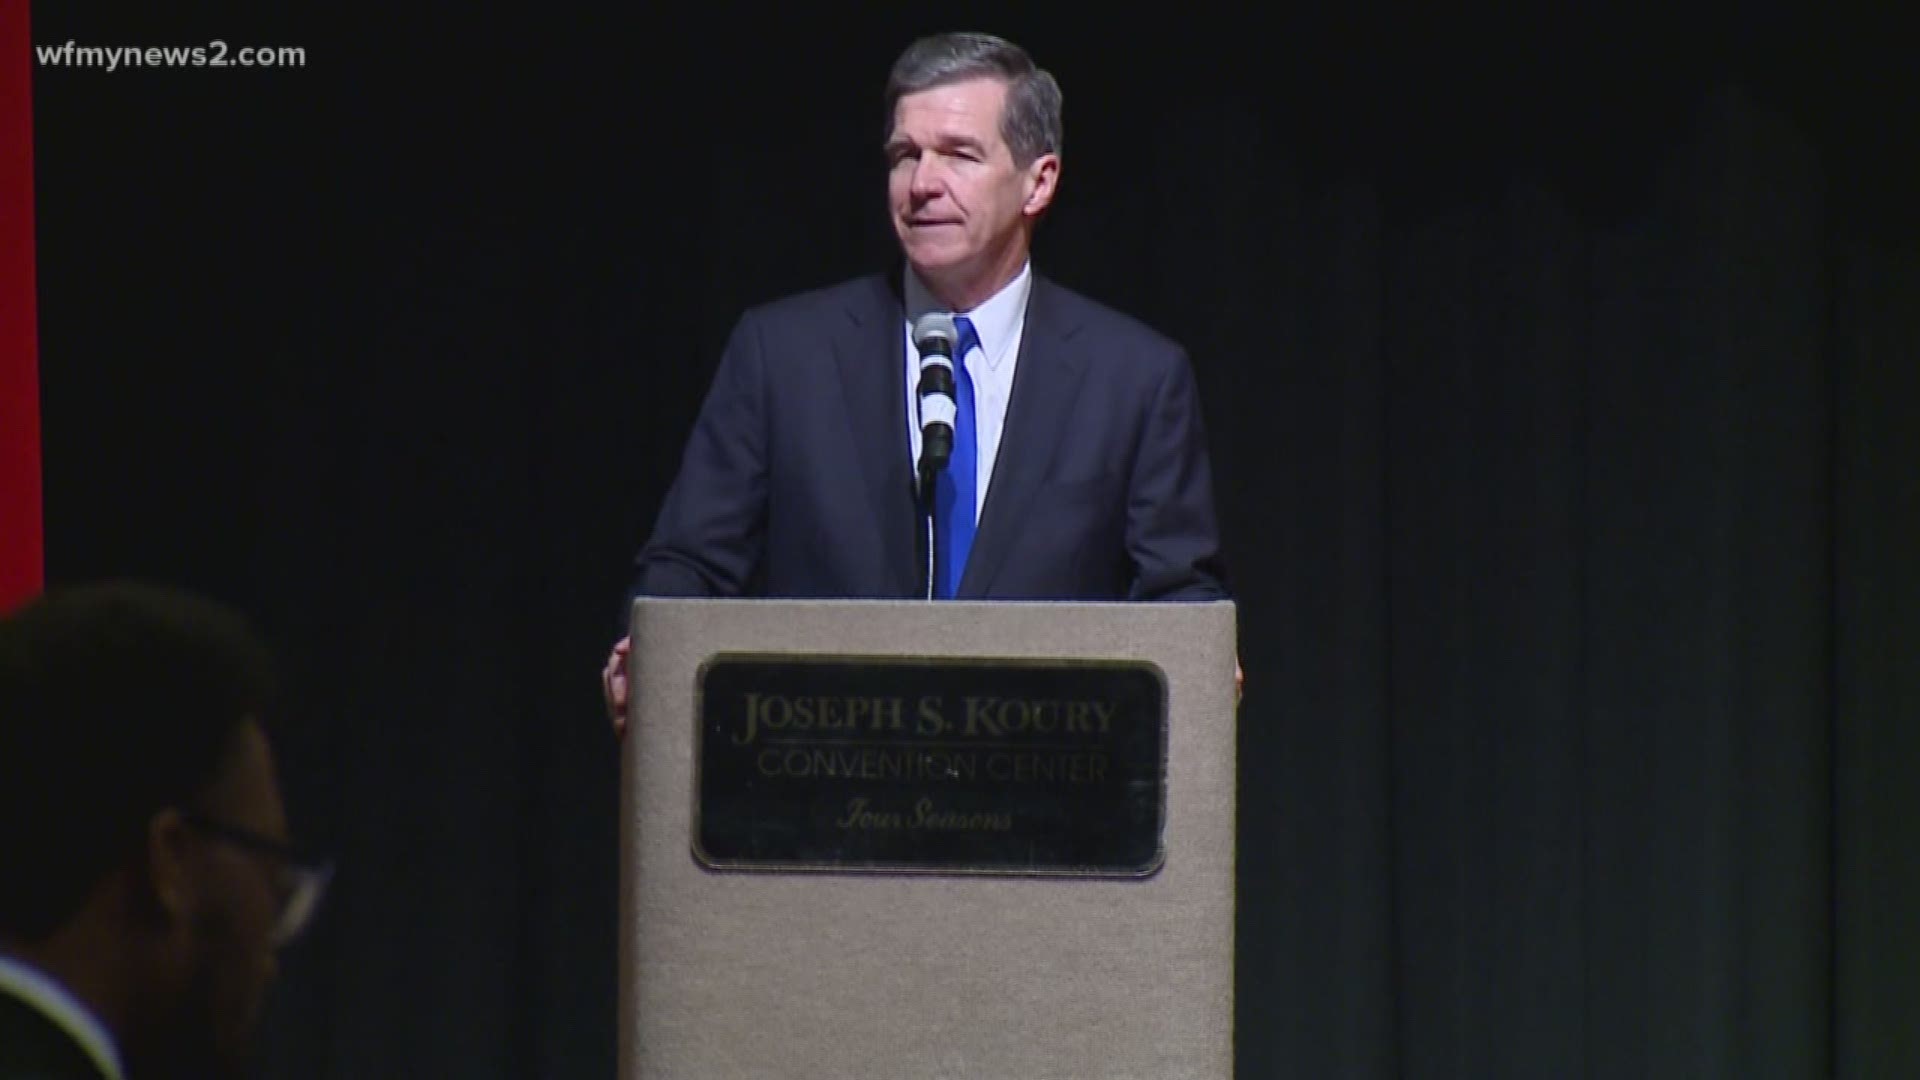 Governor Roy Cooper was in Greensboro this morning to honor Dr. King.
He was at the Martin Luther King Day Breakfast this morning at the Koury Convention Center.